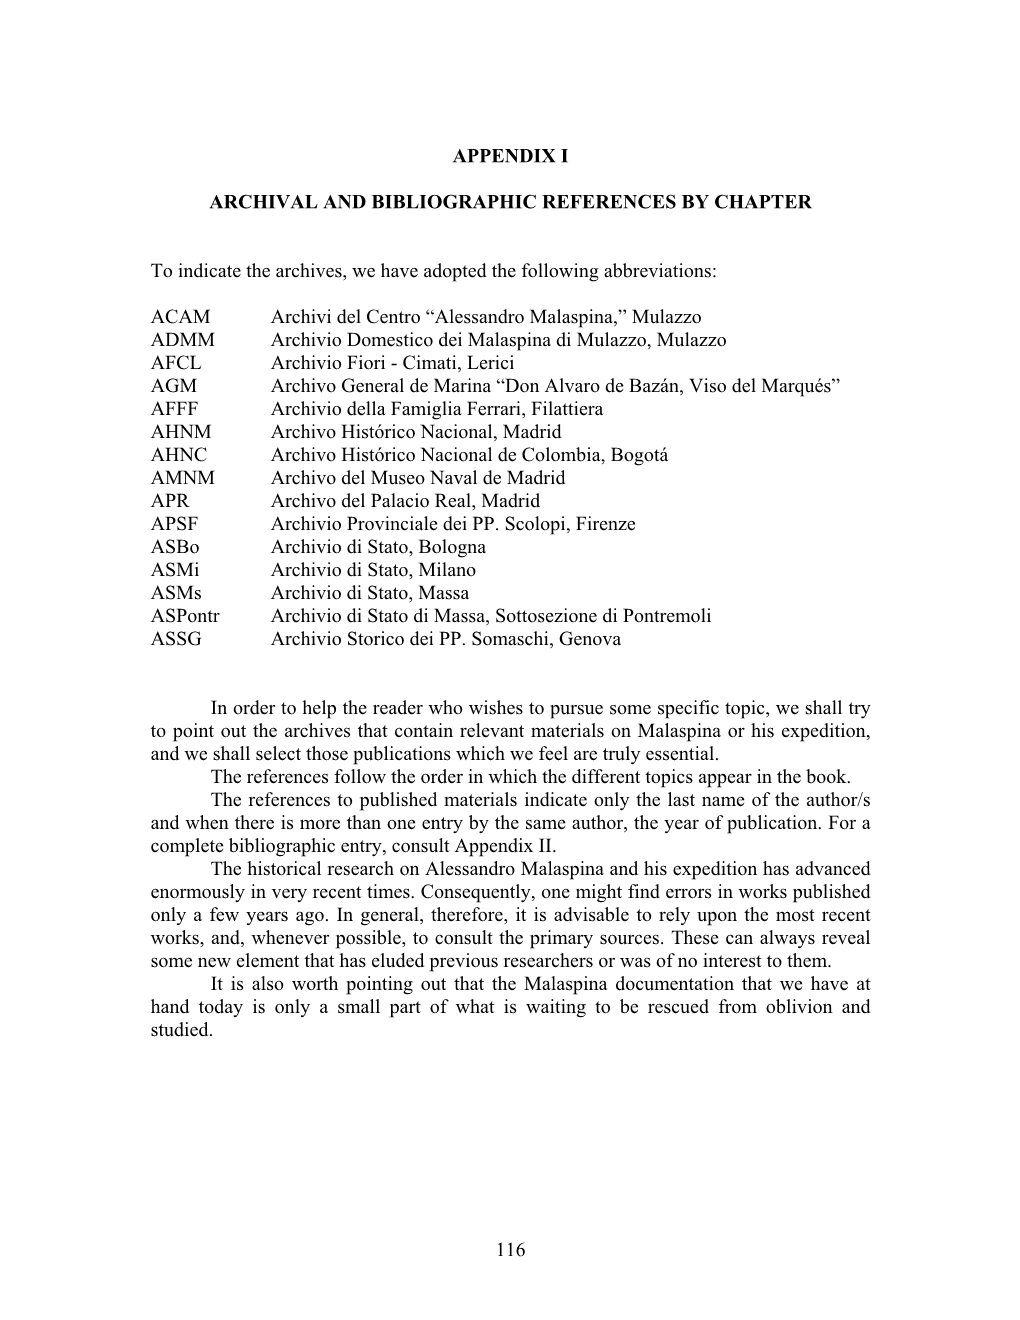 Appendix I: Archival and Bibliographical References by Chapter